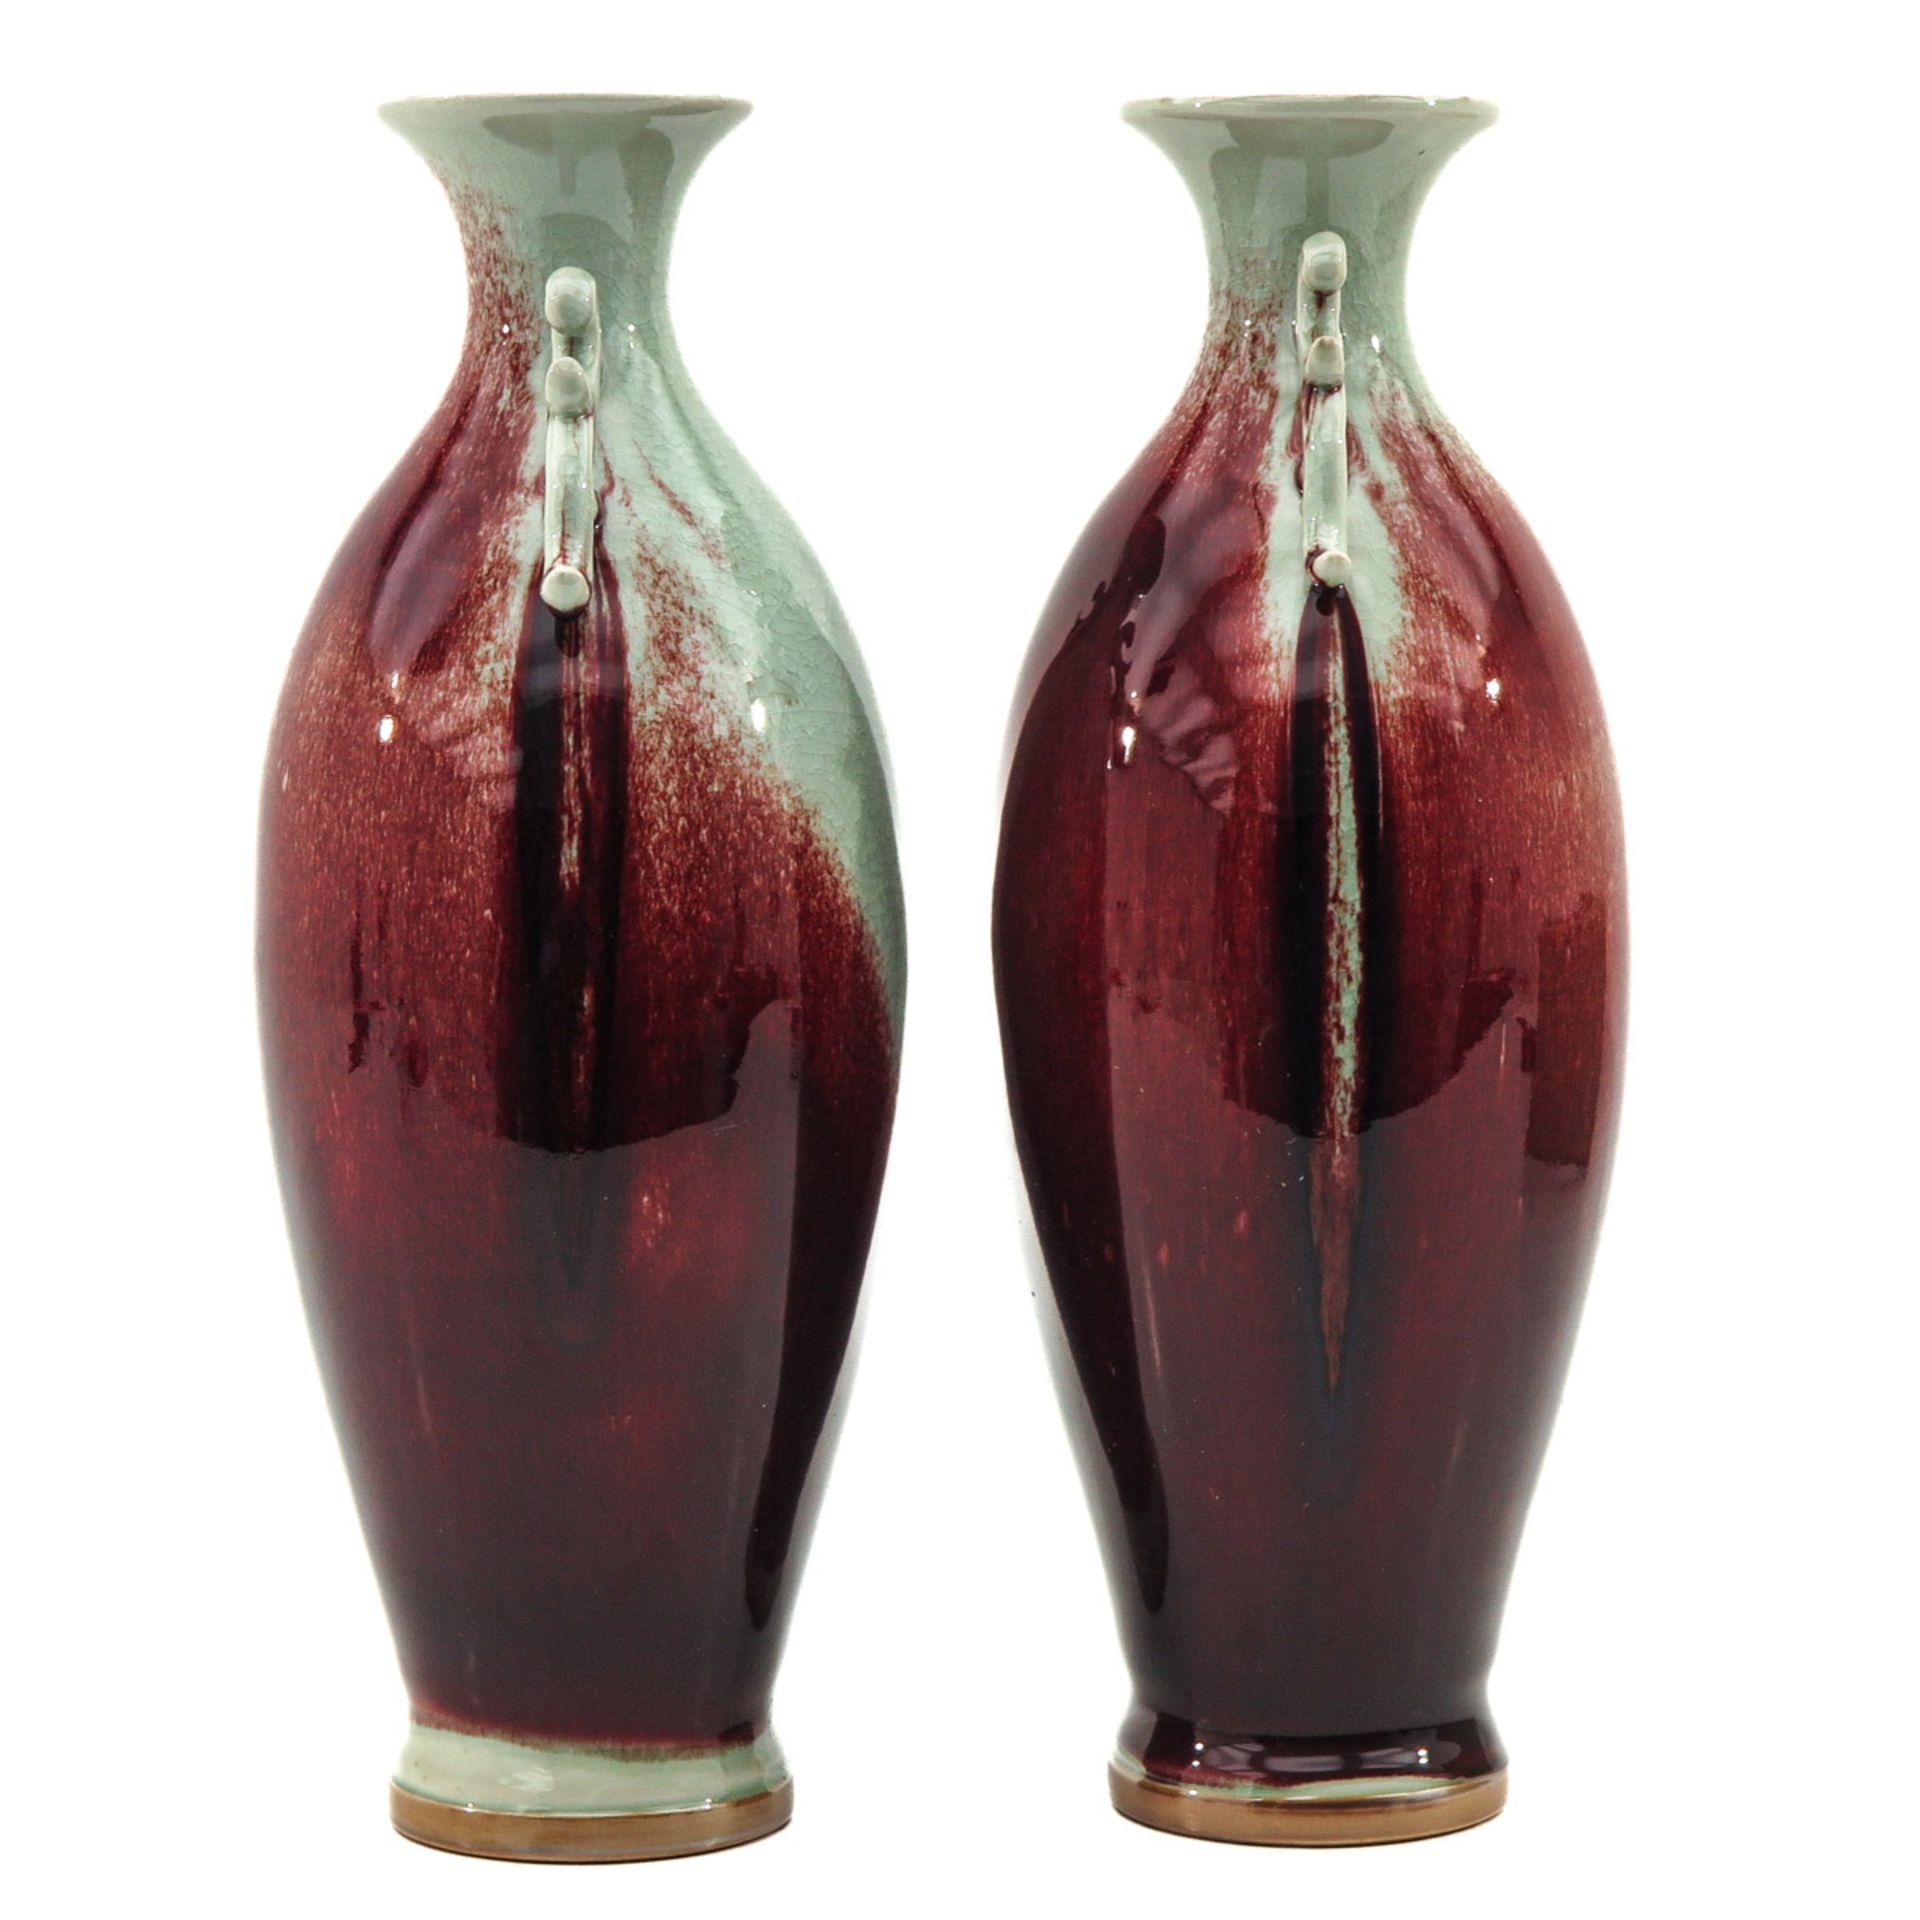 A Pair of Jun Ware Vases - Image 2 of 6